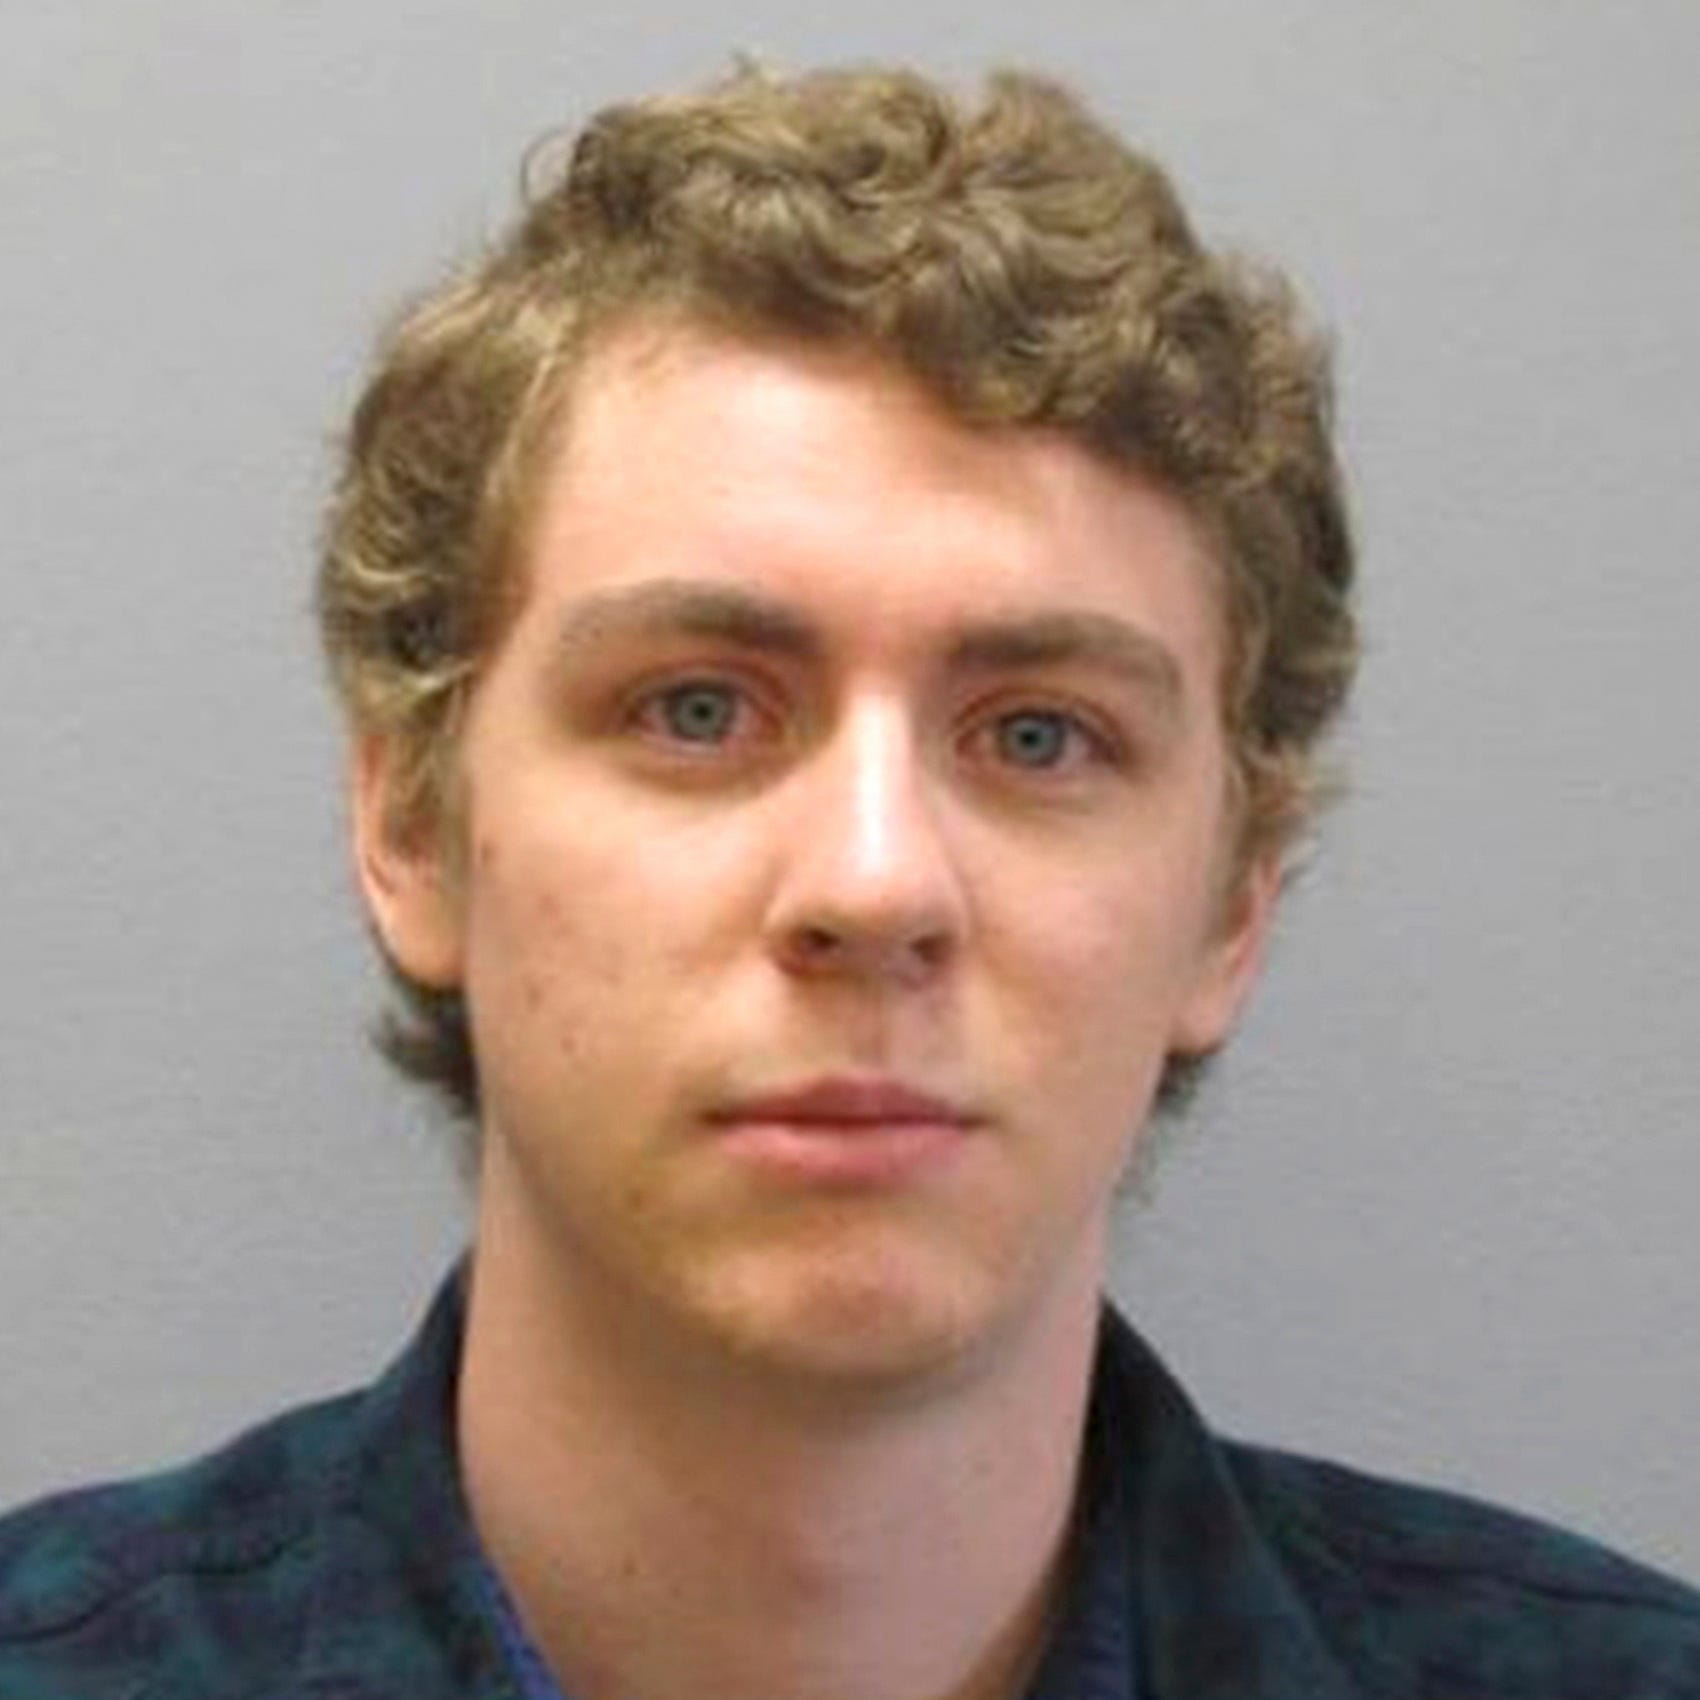 FILE - This Sept. 6, 2016 file photo released by the Greene County Sheriff's Office, shows Brock Turner at the Greene County Sheriff's Office in Xenia, Ohio, where he officially registered as a sex offender. A California agency that oversees judicial